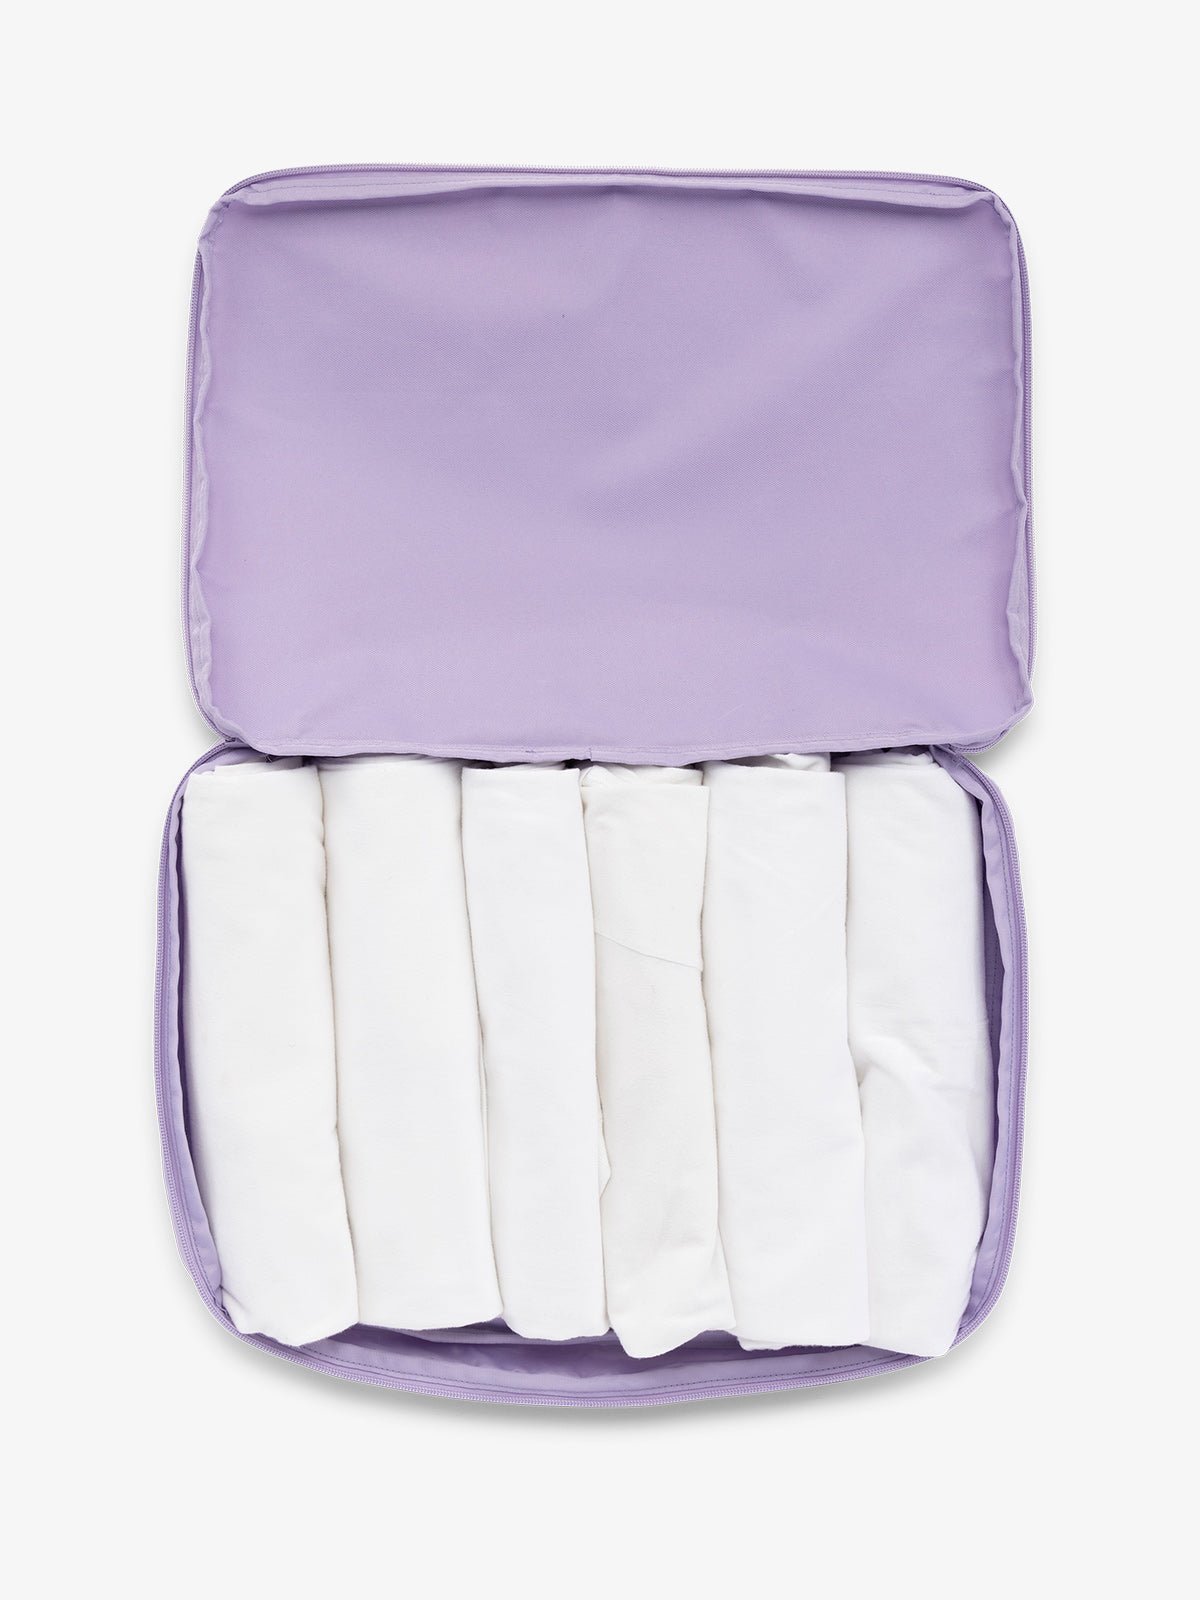 CALPAK Large Compression Packing cubes for travel made with durable materials in lavendar